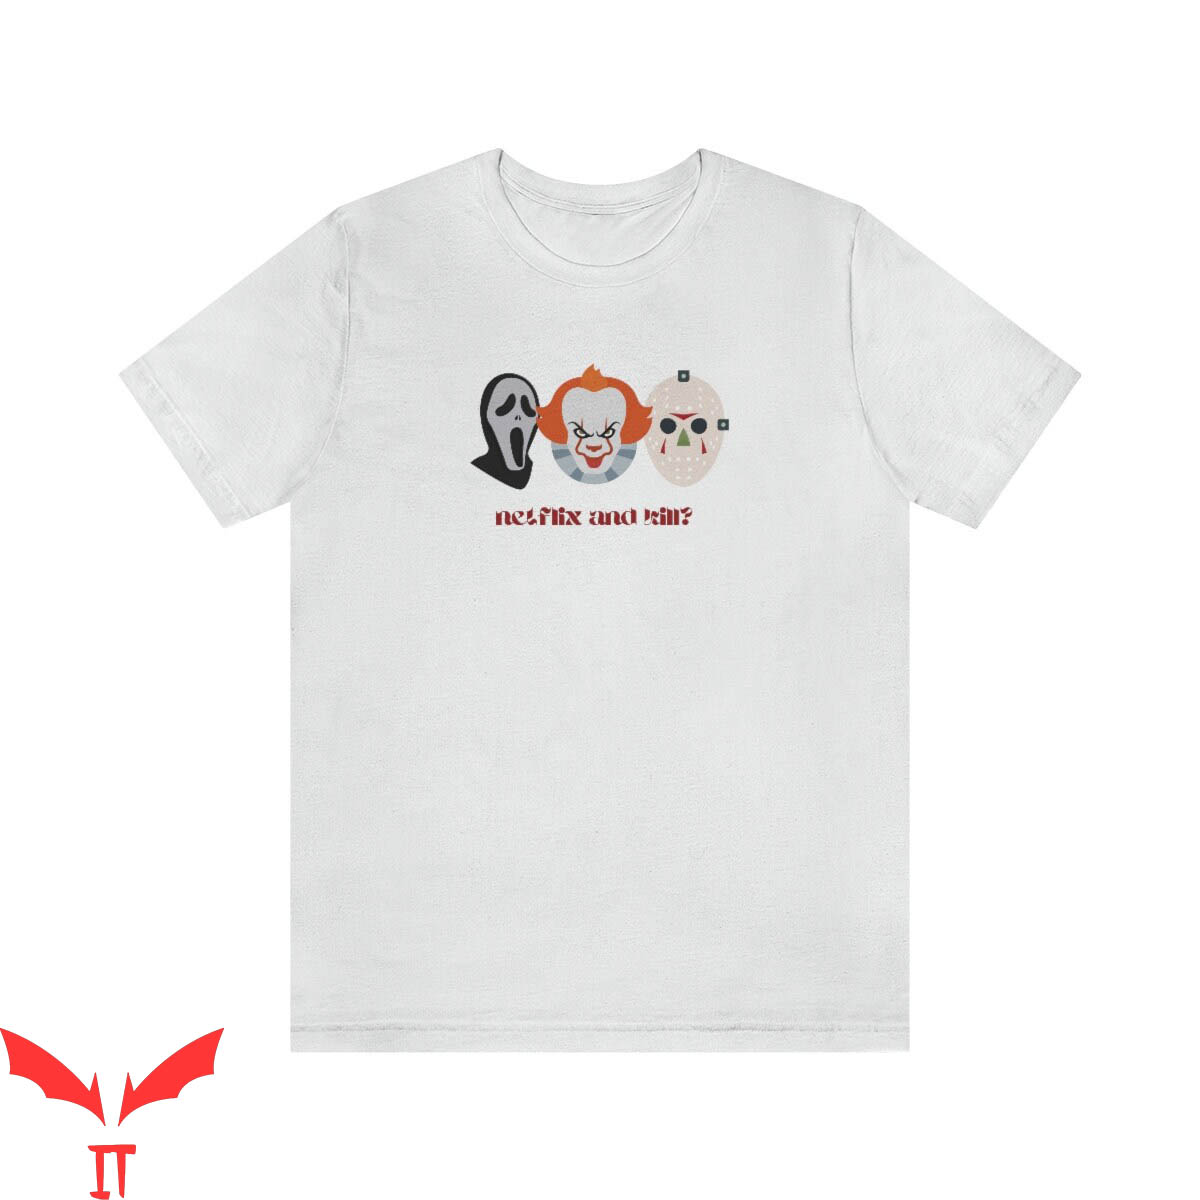 IT Pennywise T-Shirt Netflix And Kill Shirt For Halloween